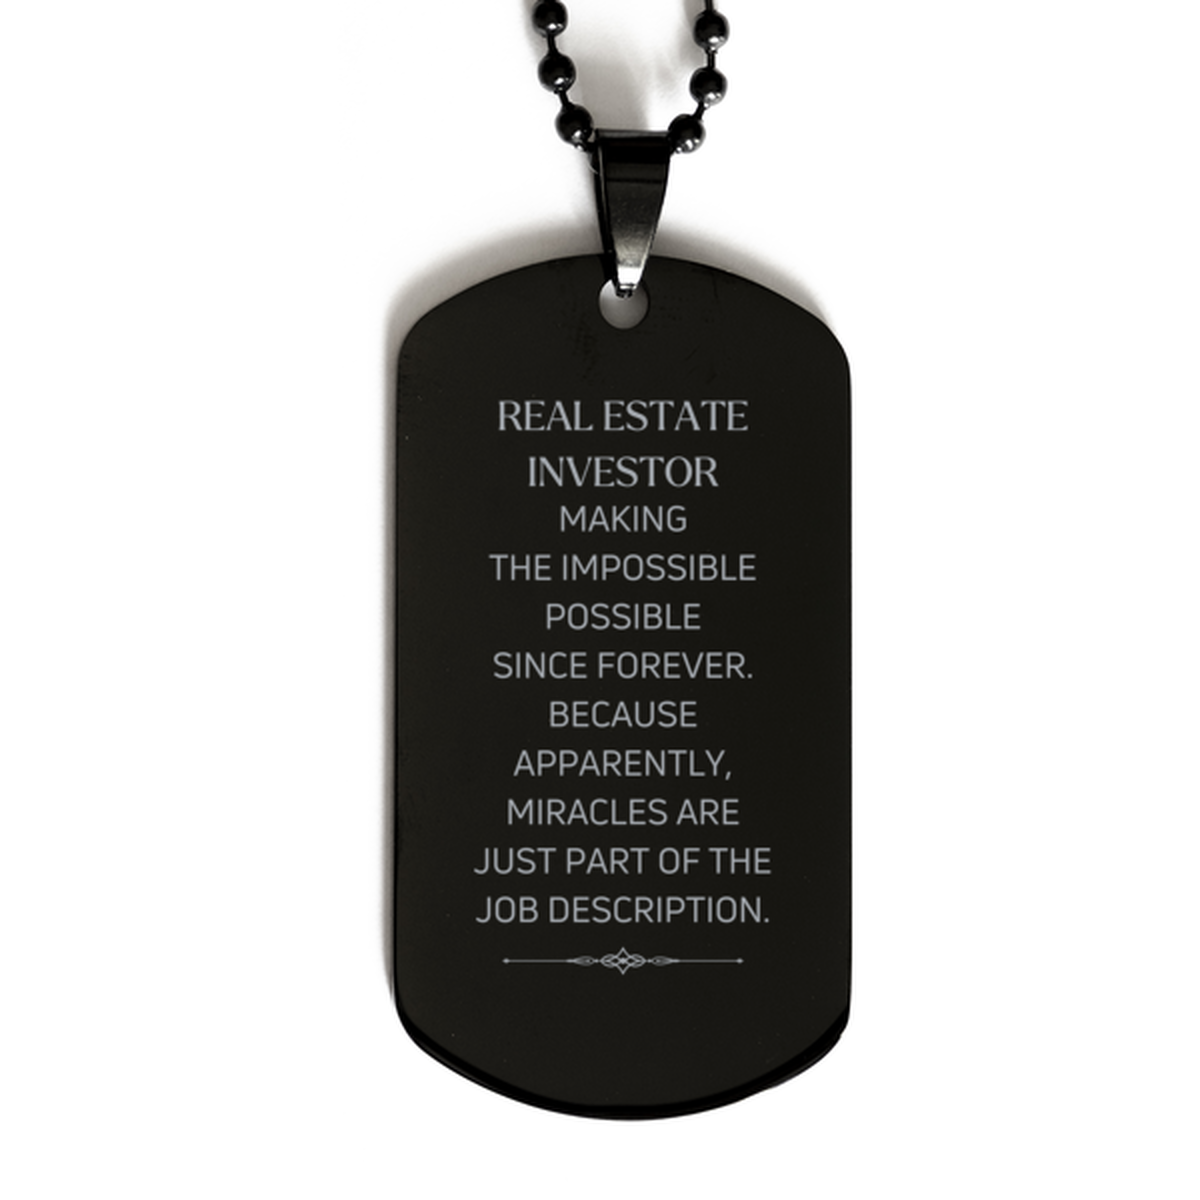 Funny Real Estate Investor Gifts, Miracles are just part of the job description, Inspirational Birthday Black Dog Tag For Real Estate Investor, Men, Women, Coworkers, Friends, Boss